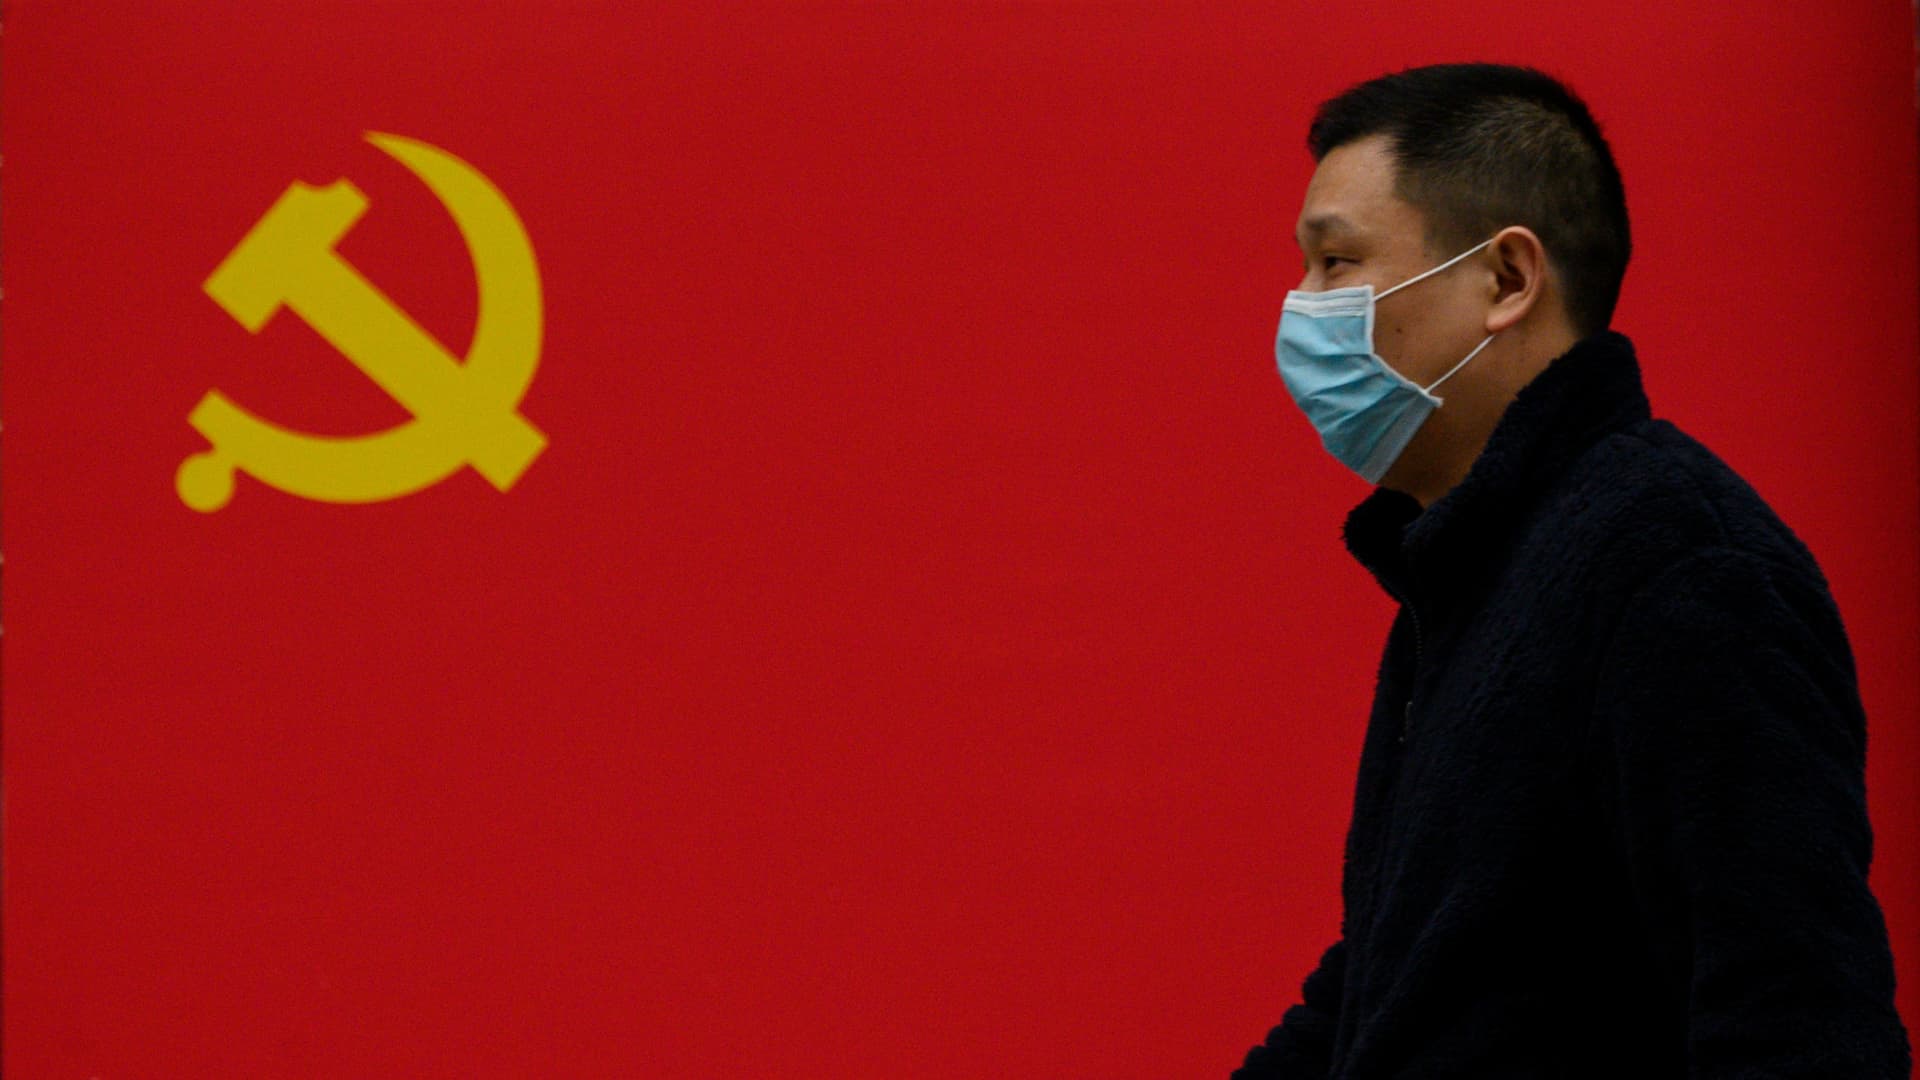 The World Health Organization on Friday called on China to release new data linking the Covid pandemic's origins to animal samples at Wuhan Marke